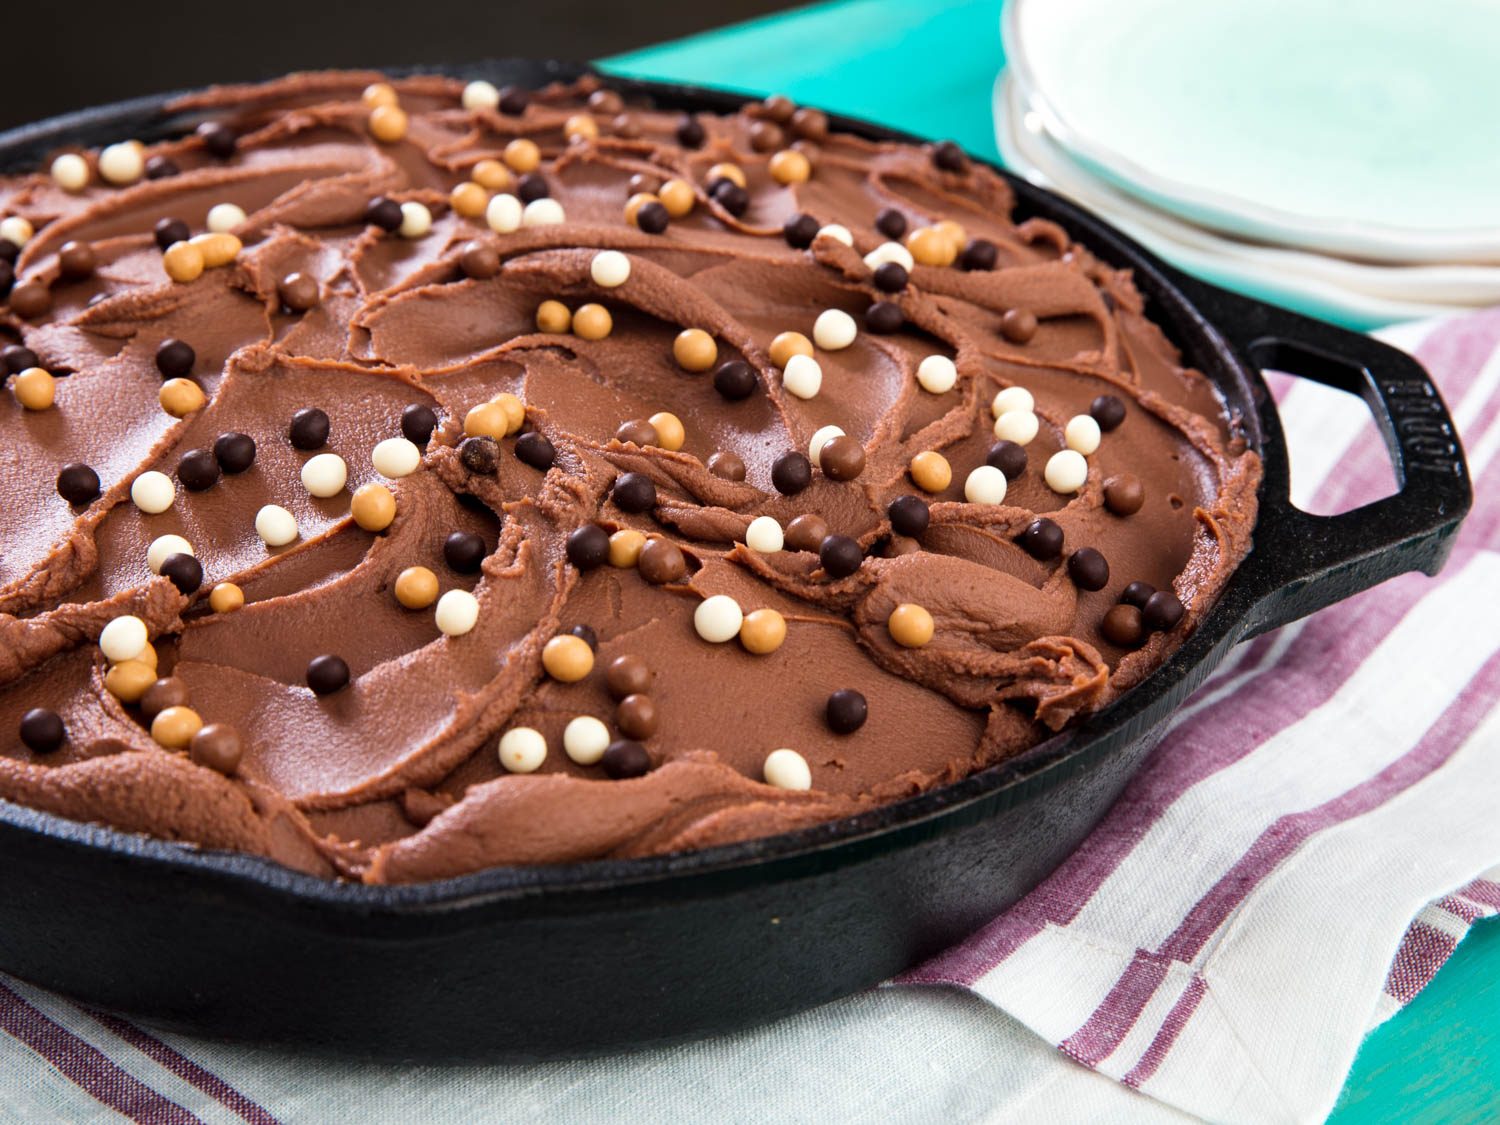 Chocolate Skillet Cake With Milk Chocolate Frosting